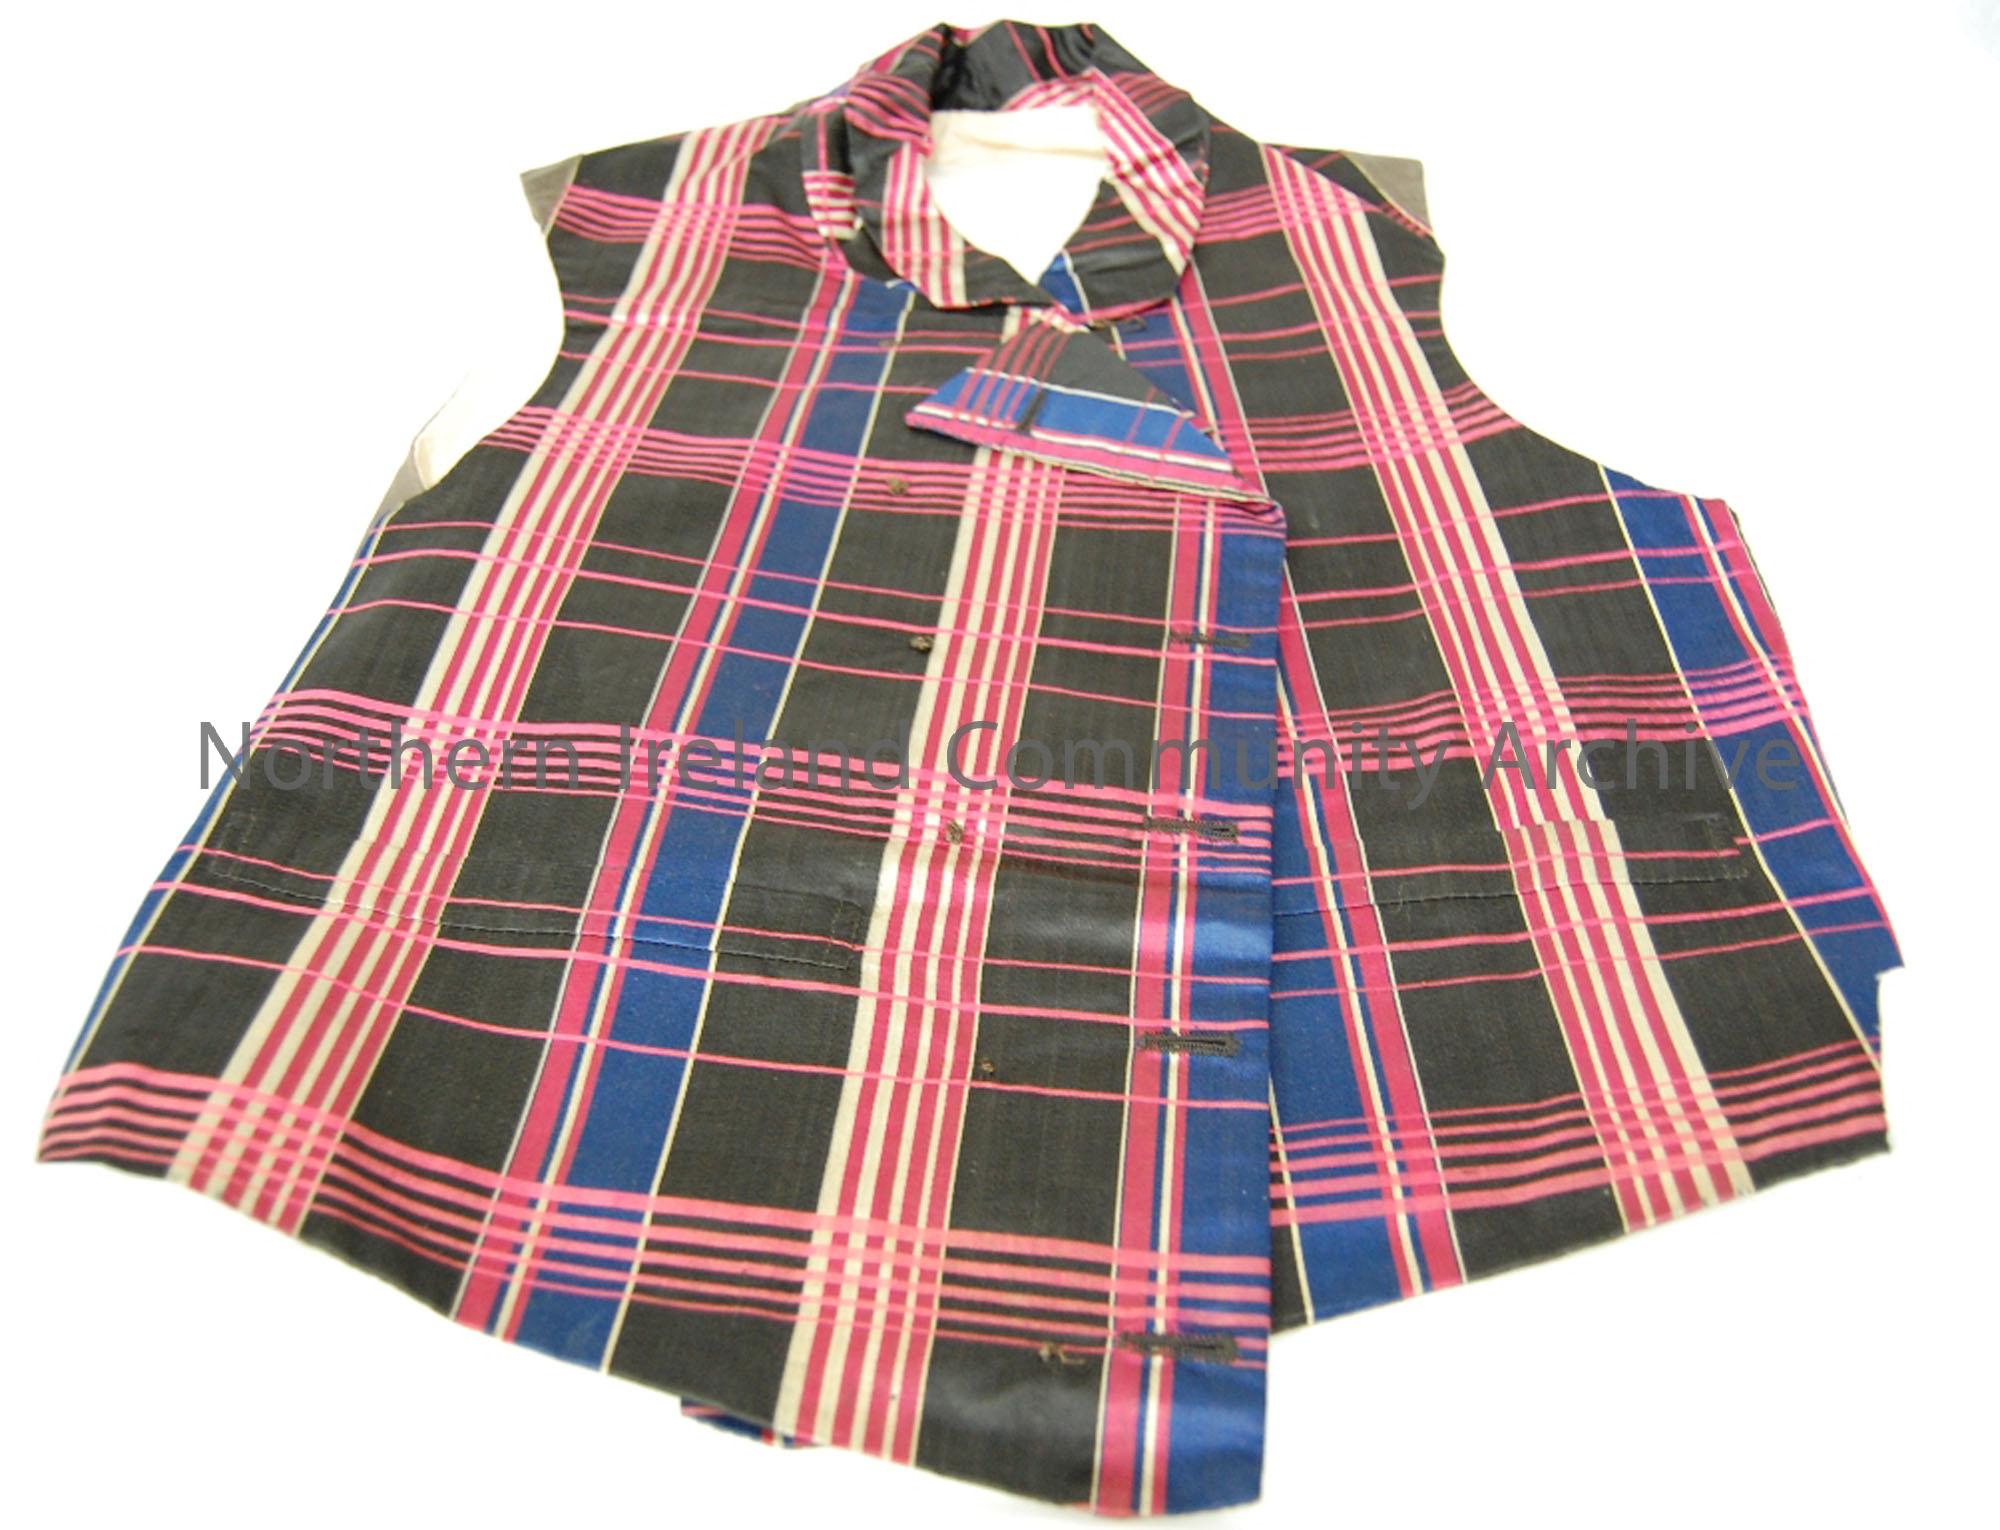 Haul’s waistcoat, over 100 years. Blue, pink, gold and black.